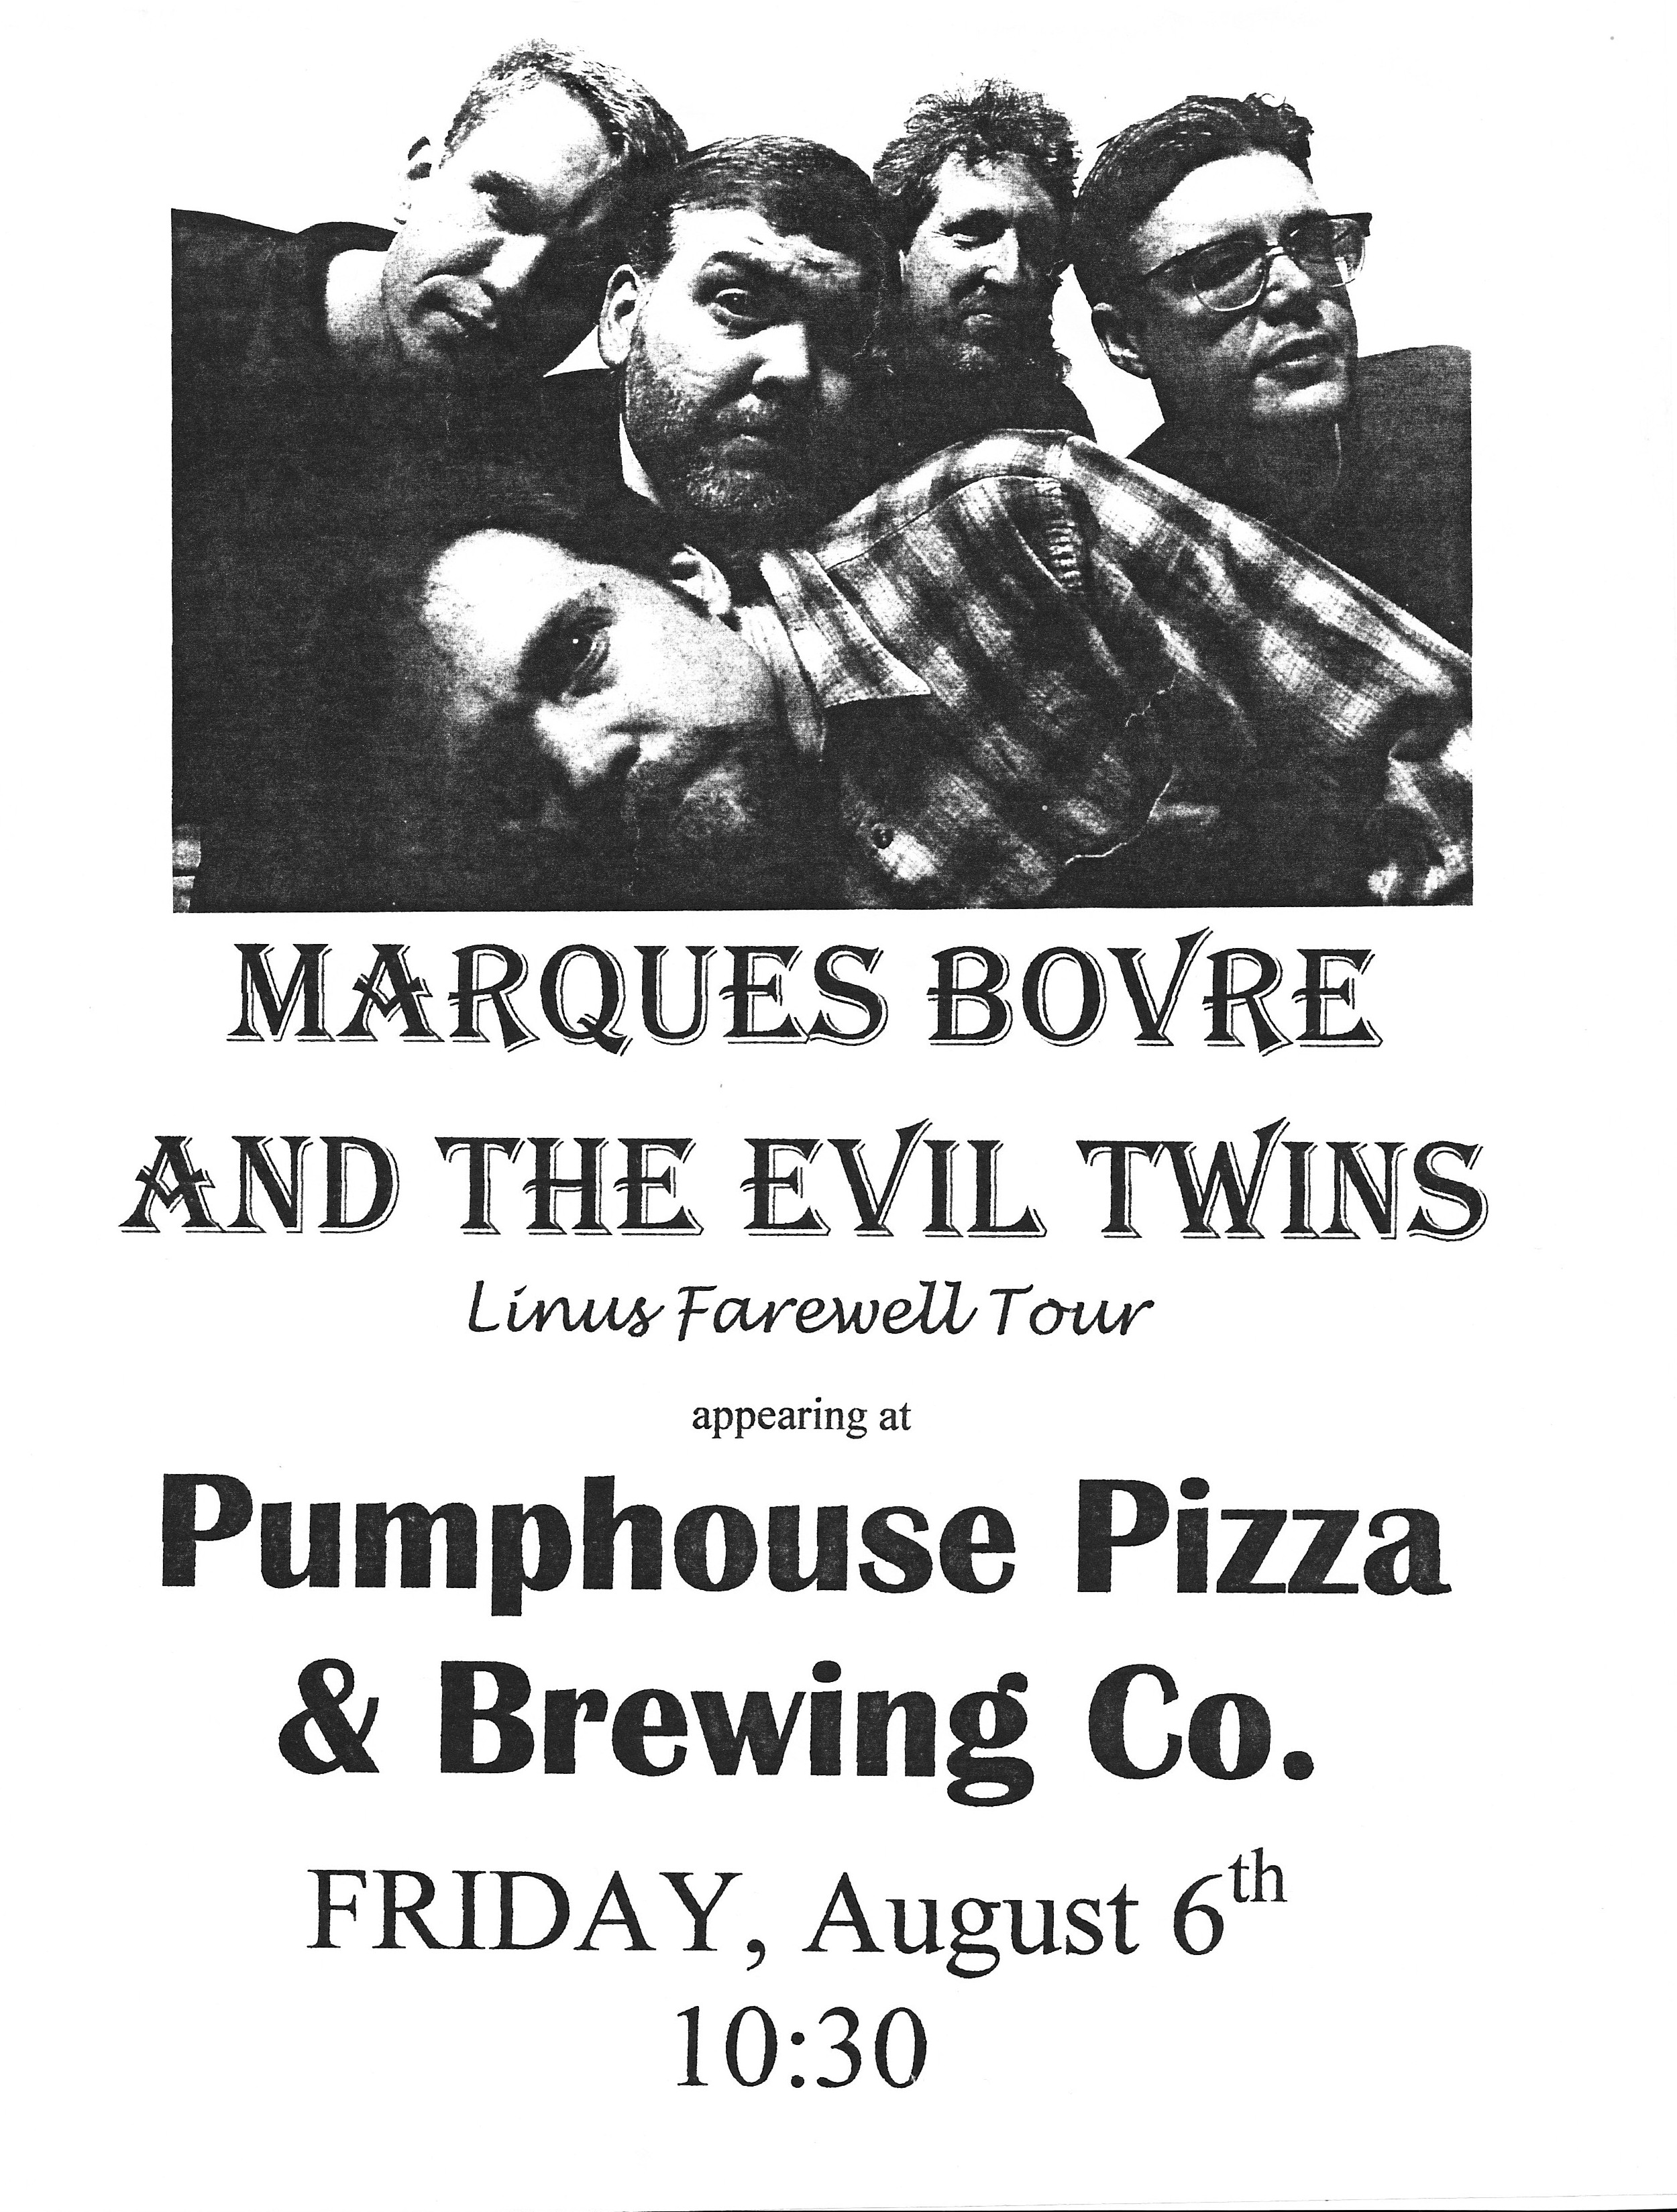 Marques Bovre and the Evil Twins, August 8, 1999